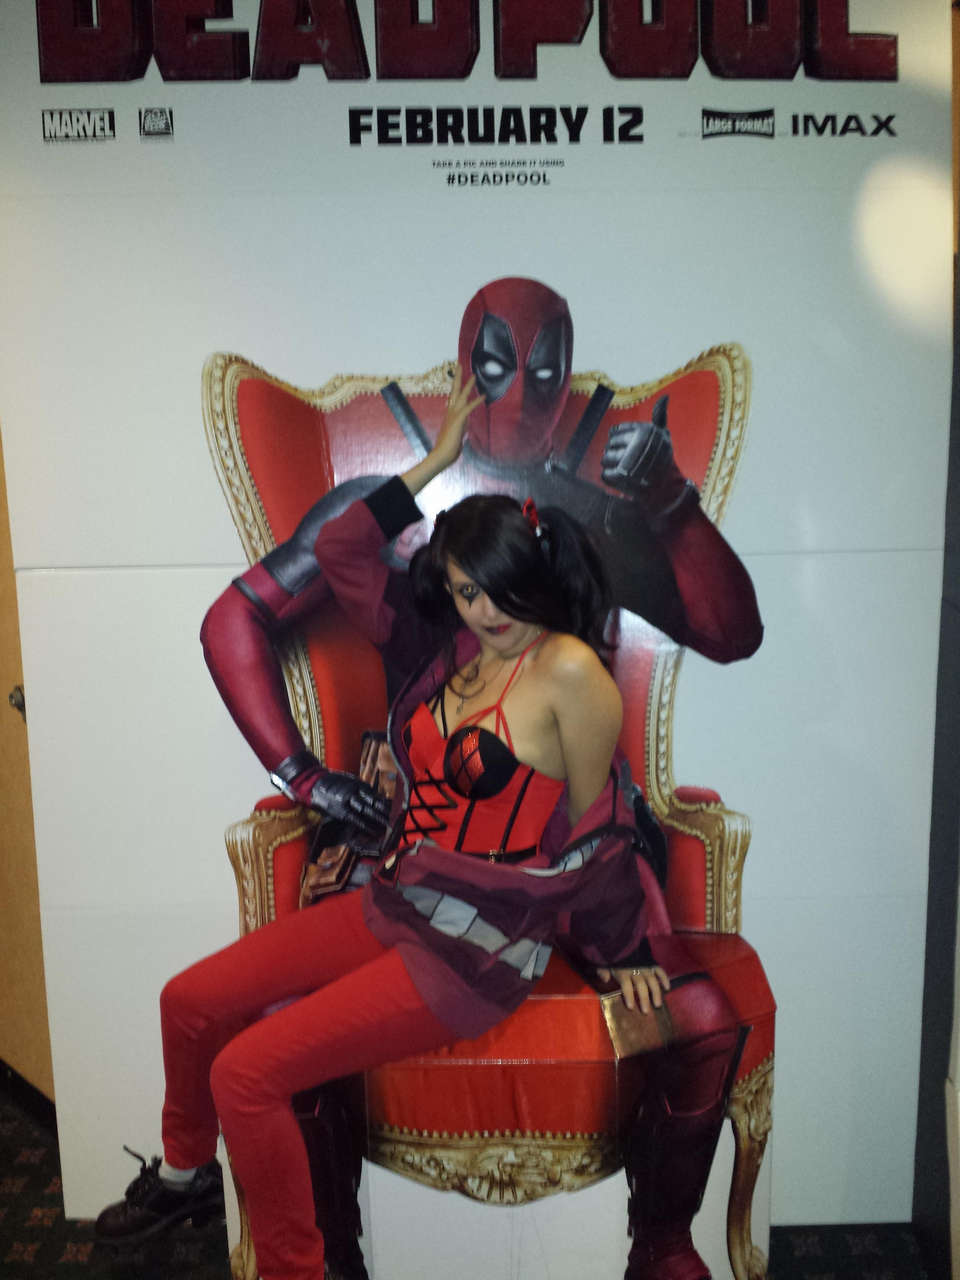 I Attended The Deadpool Premier And Dressed Up As Harley Quinn As If She Was A Fan Of The Deadpool Comic